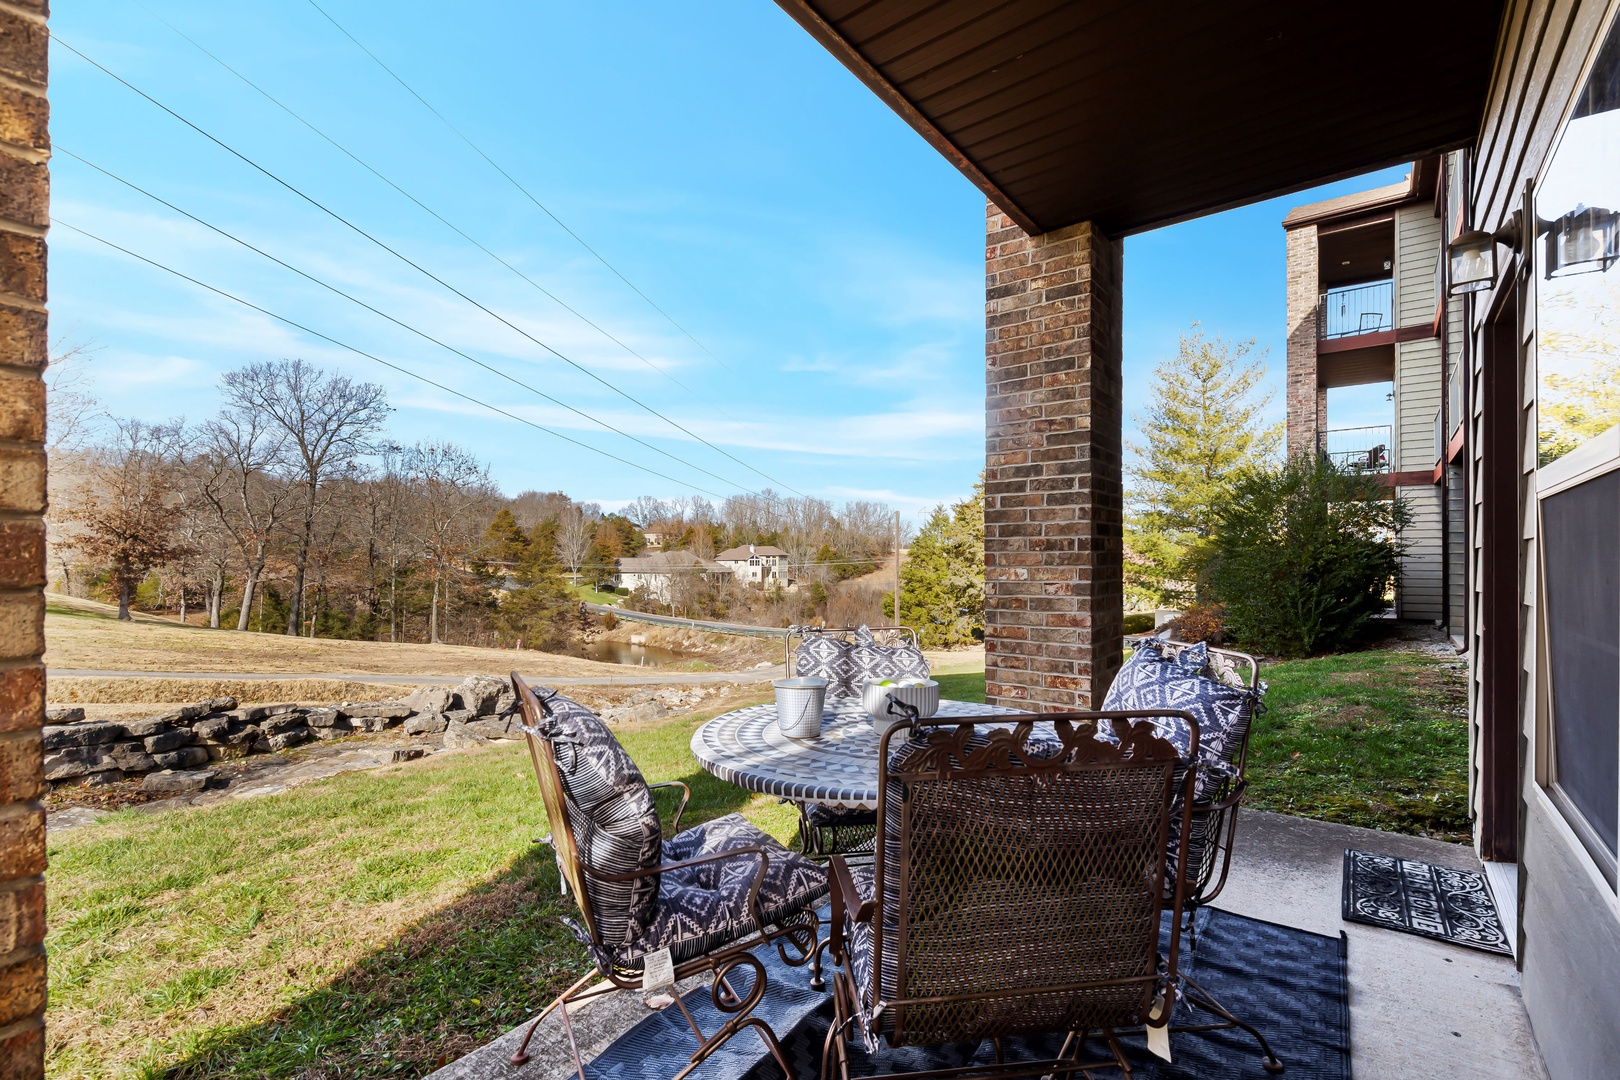 Sip morning coffee or enjoy a meal alfresco on the serene patio